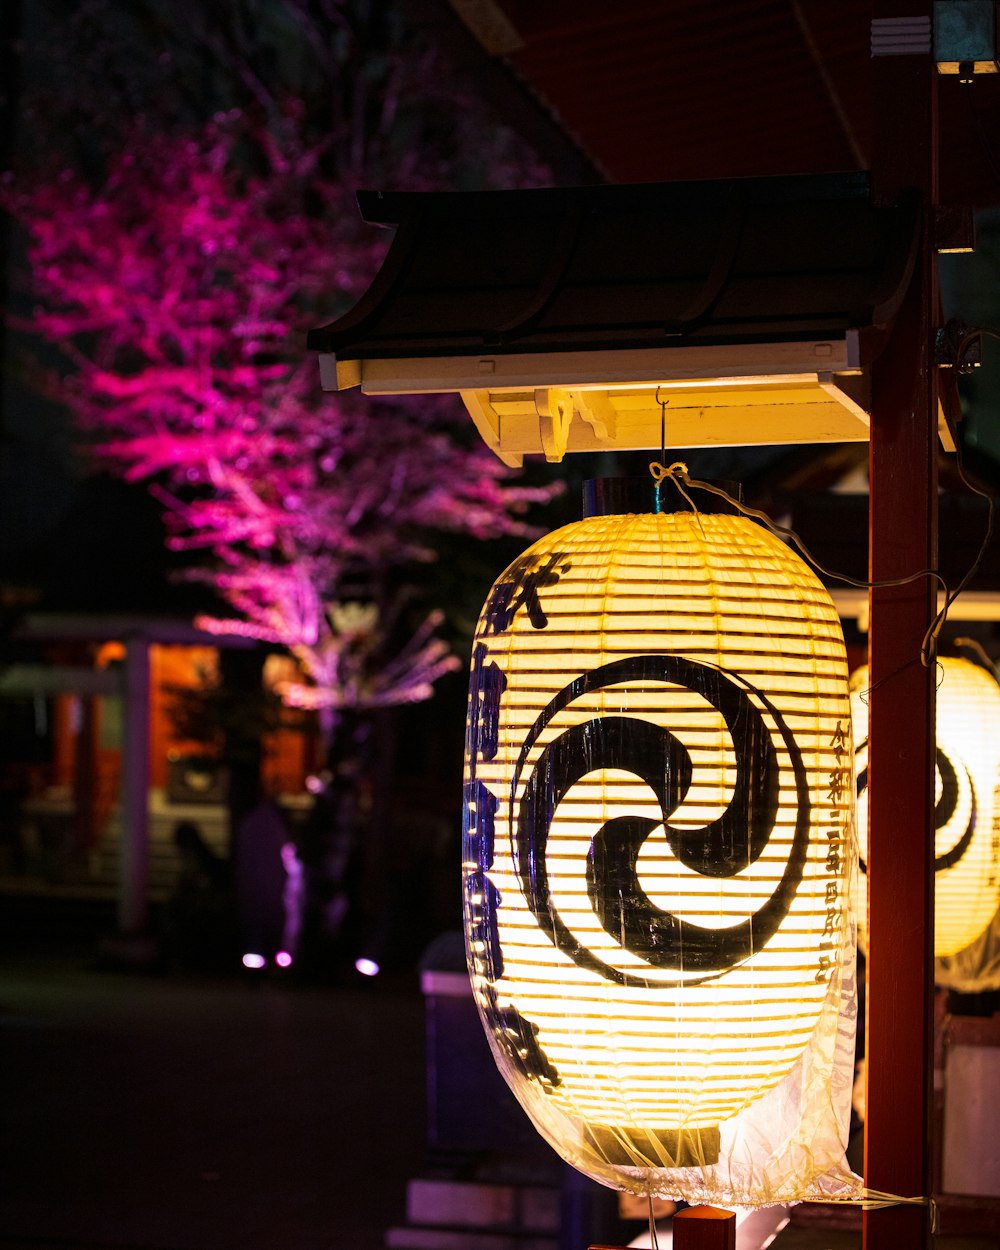 a yellow lantern with a spiral design on it